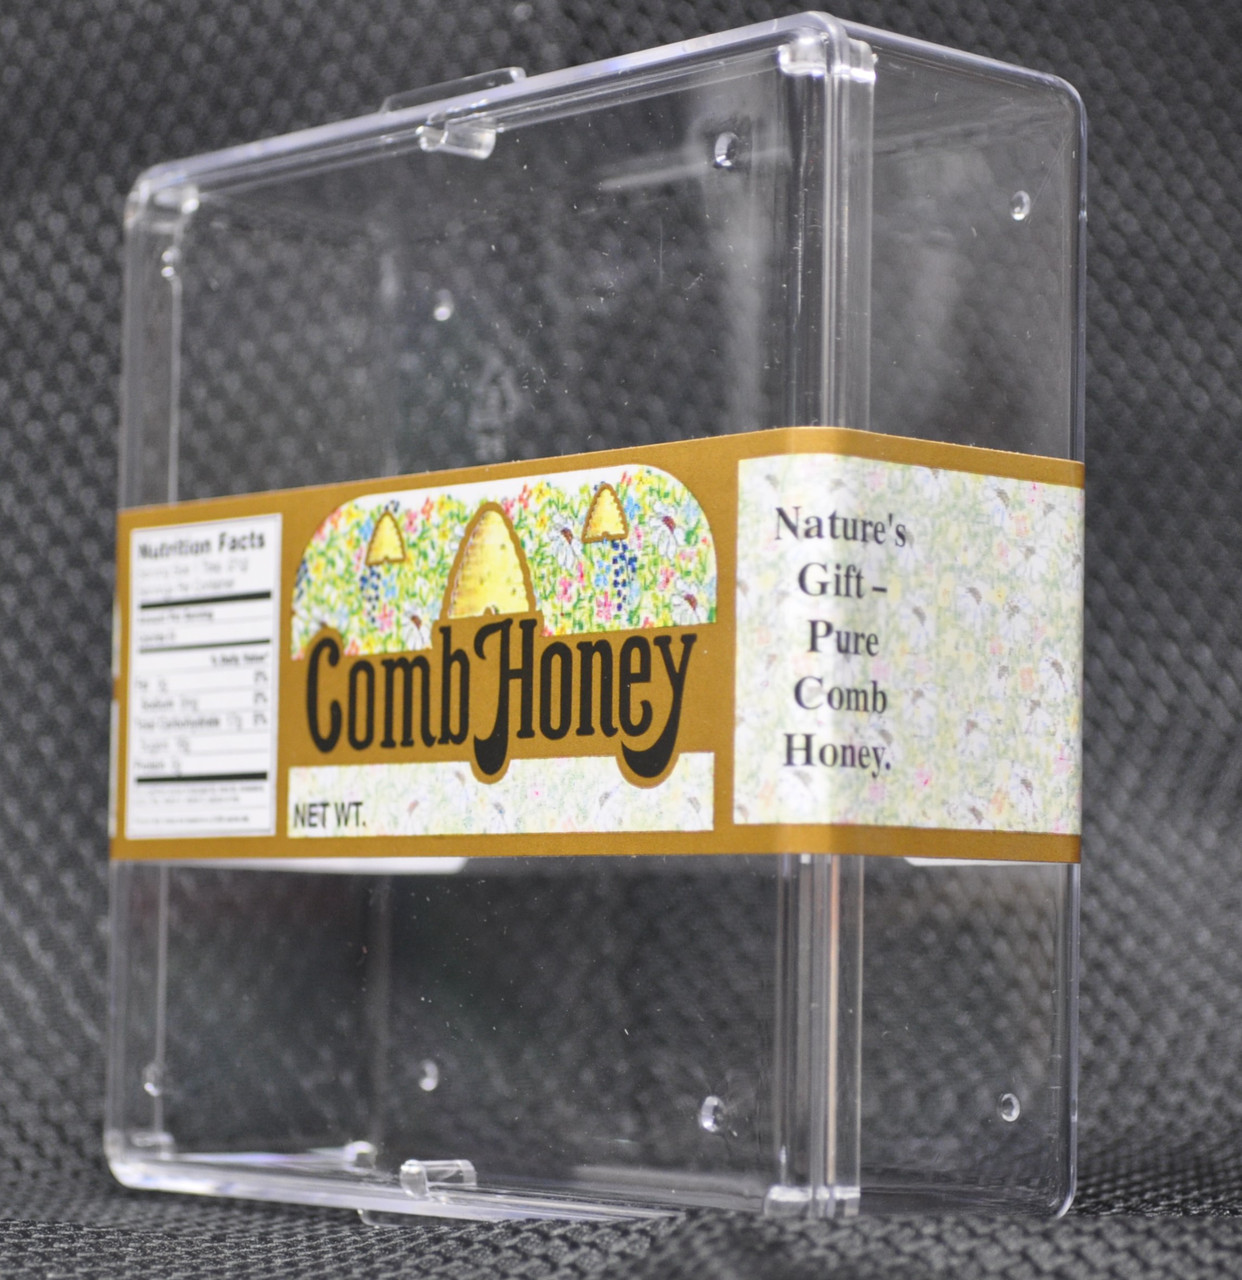 Comb honey label on plastic comb honey tray. side view.